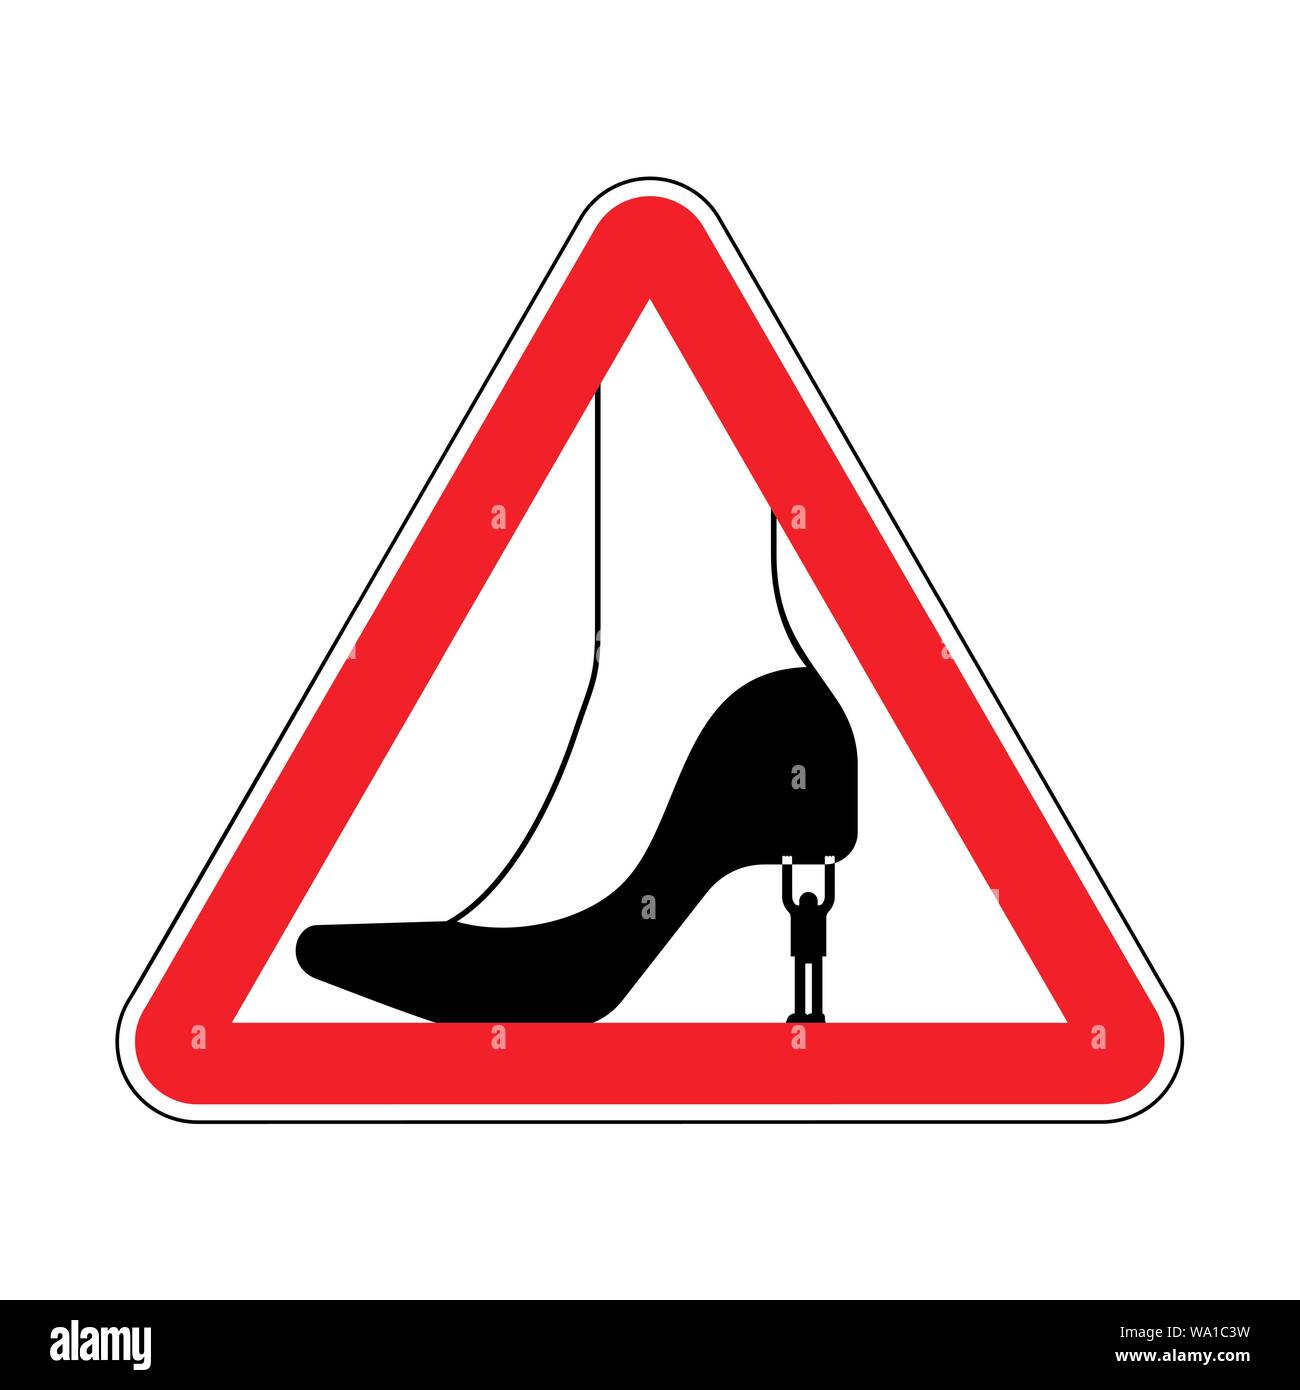 Attention Henpecked man. Warning red road sign. Caution guy Holding woman shoe Stock Vector